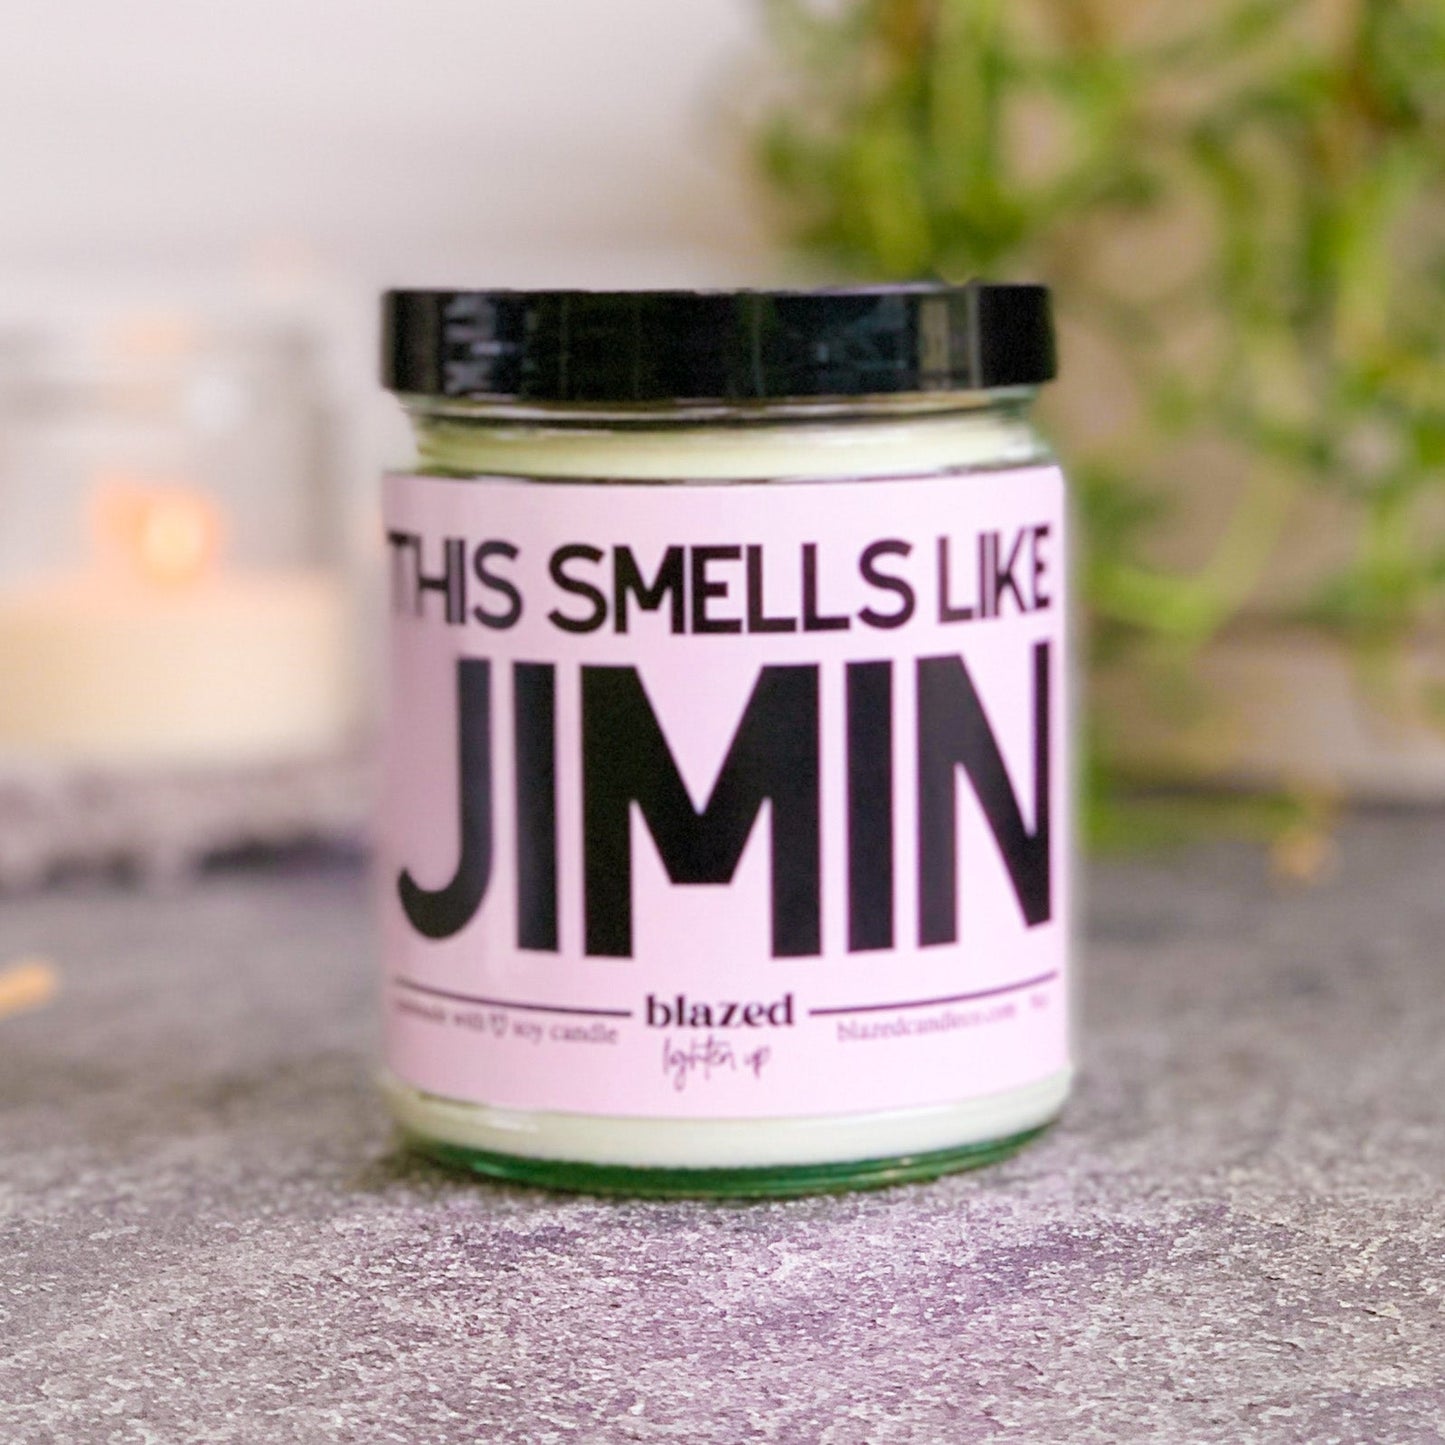 This Smells Like Jimin Candle